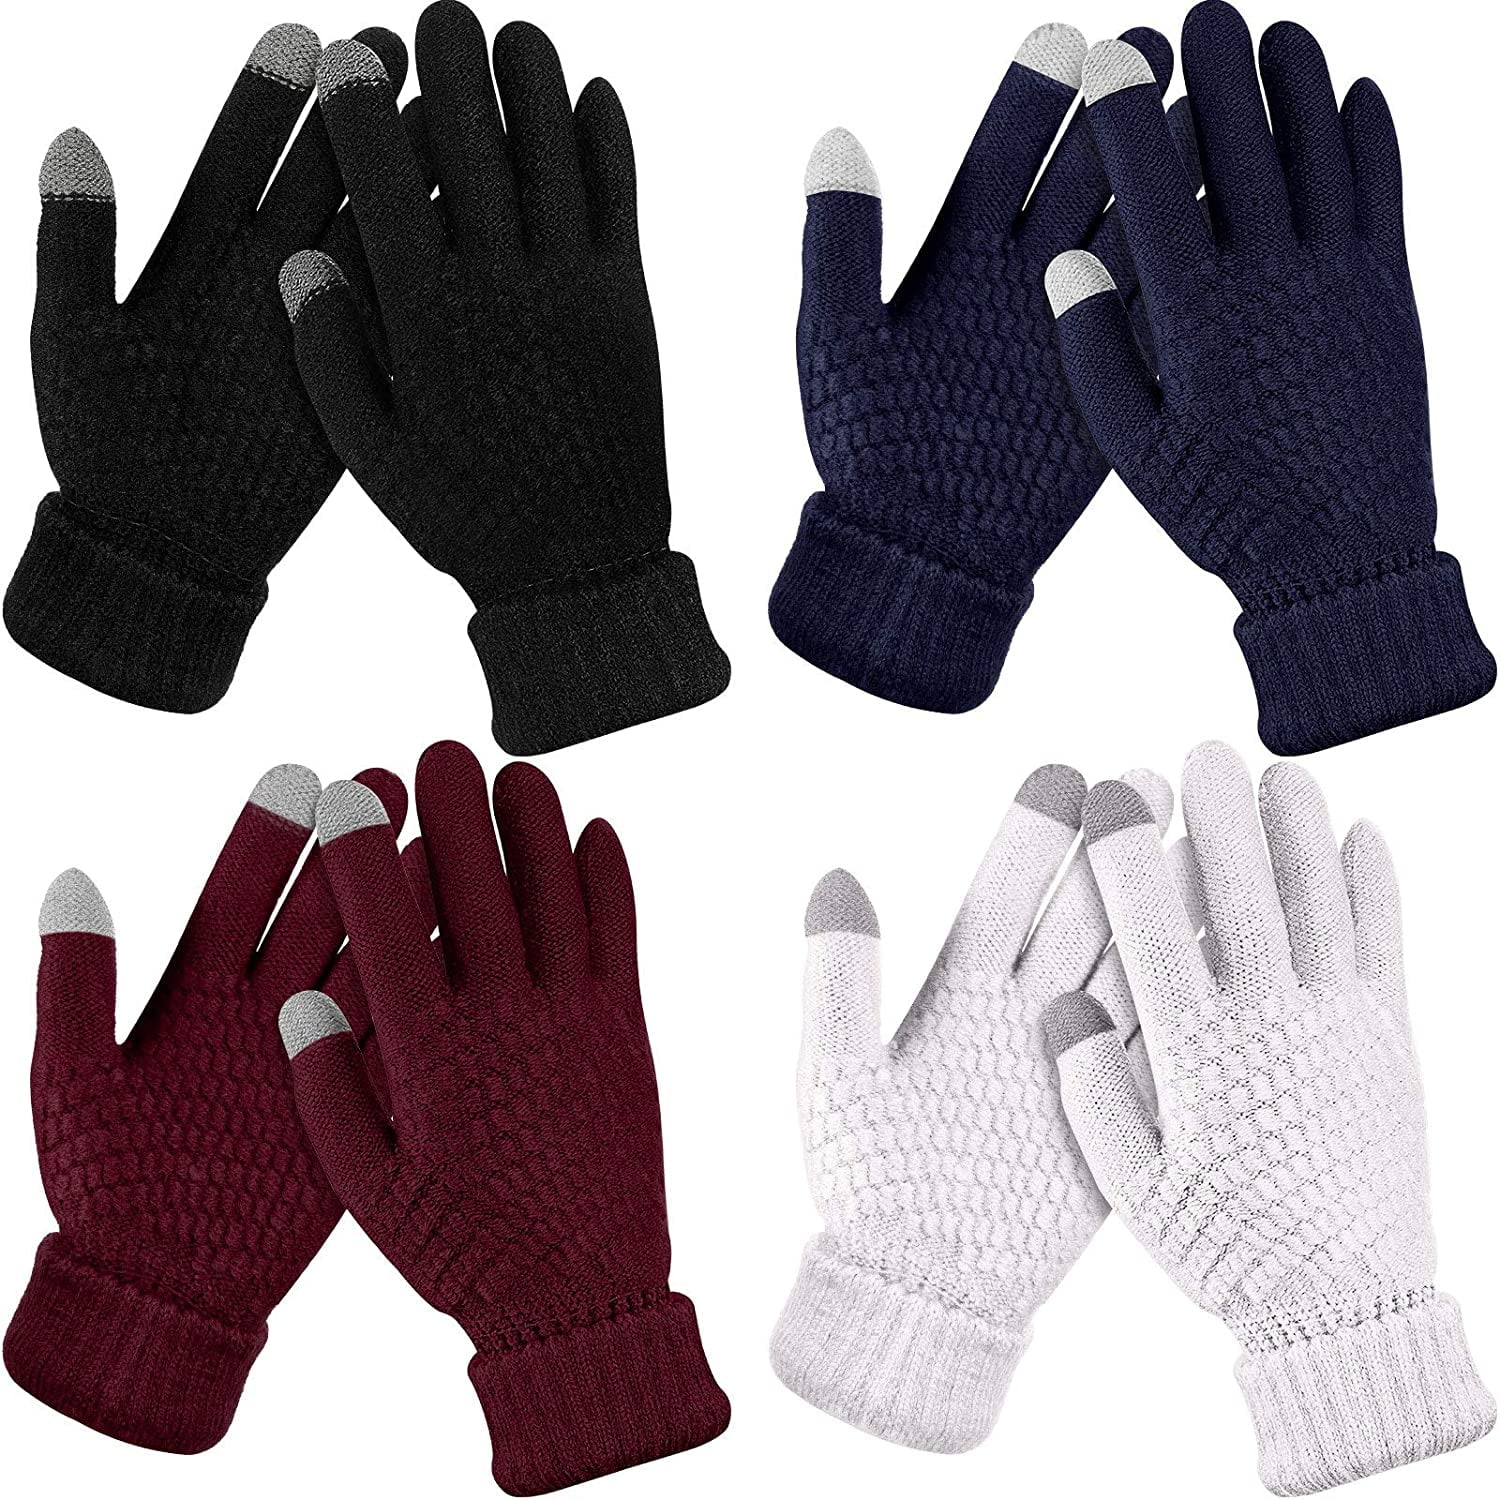 Winter Warm Gloves Knit Gloves For Men Women Texting Touch Screen 1-10Pairs